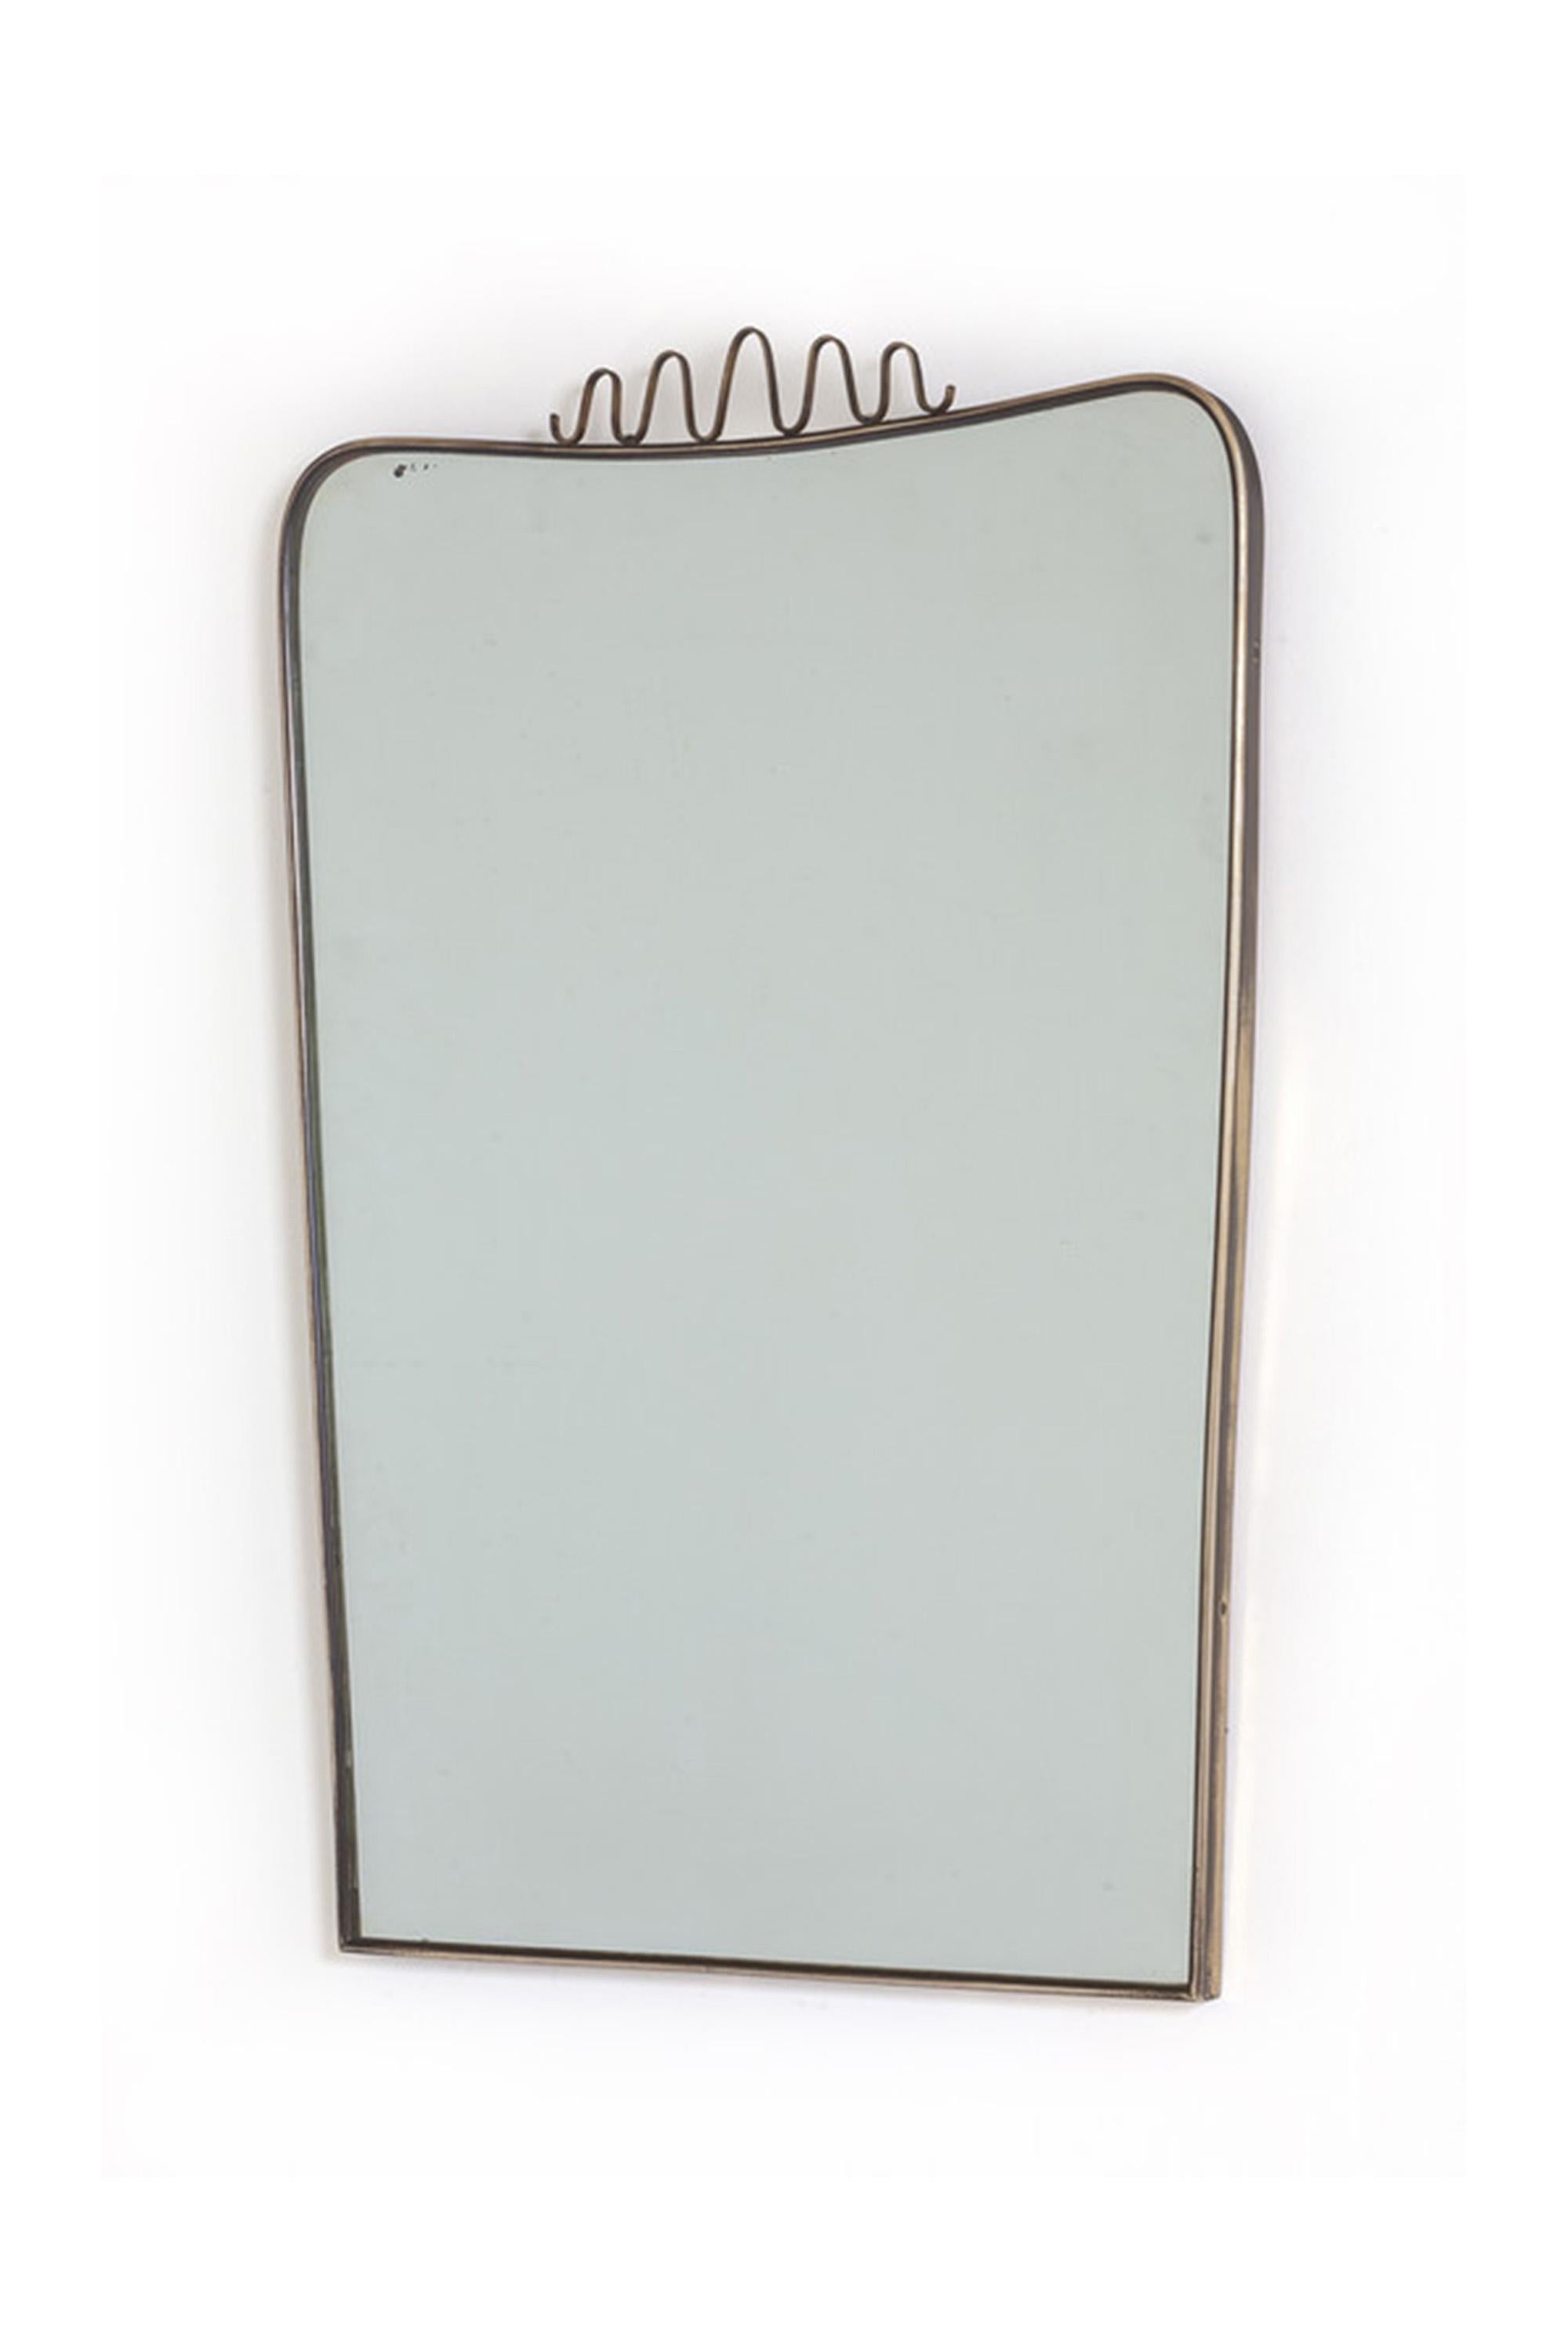 20th Century Italian Brass Mirror in The Style of Gio Ponti, 1950s For Sale